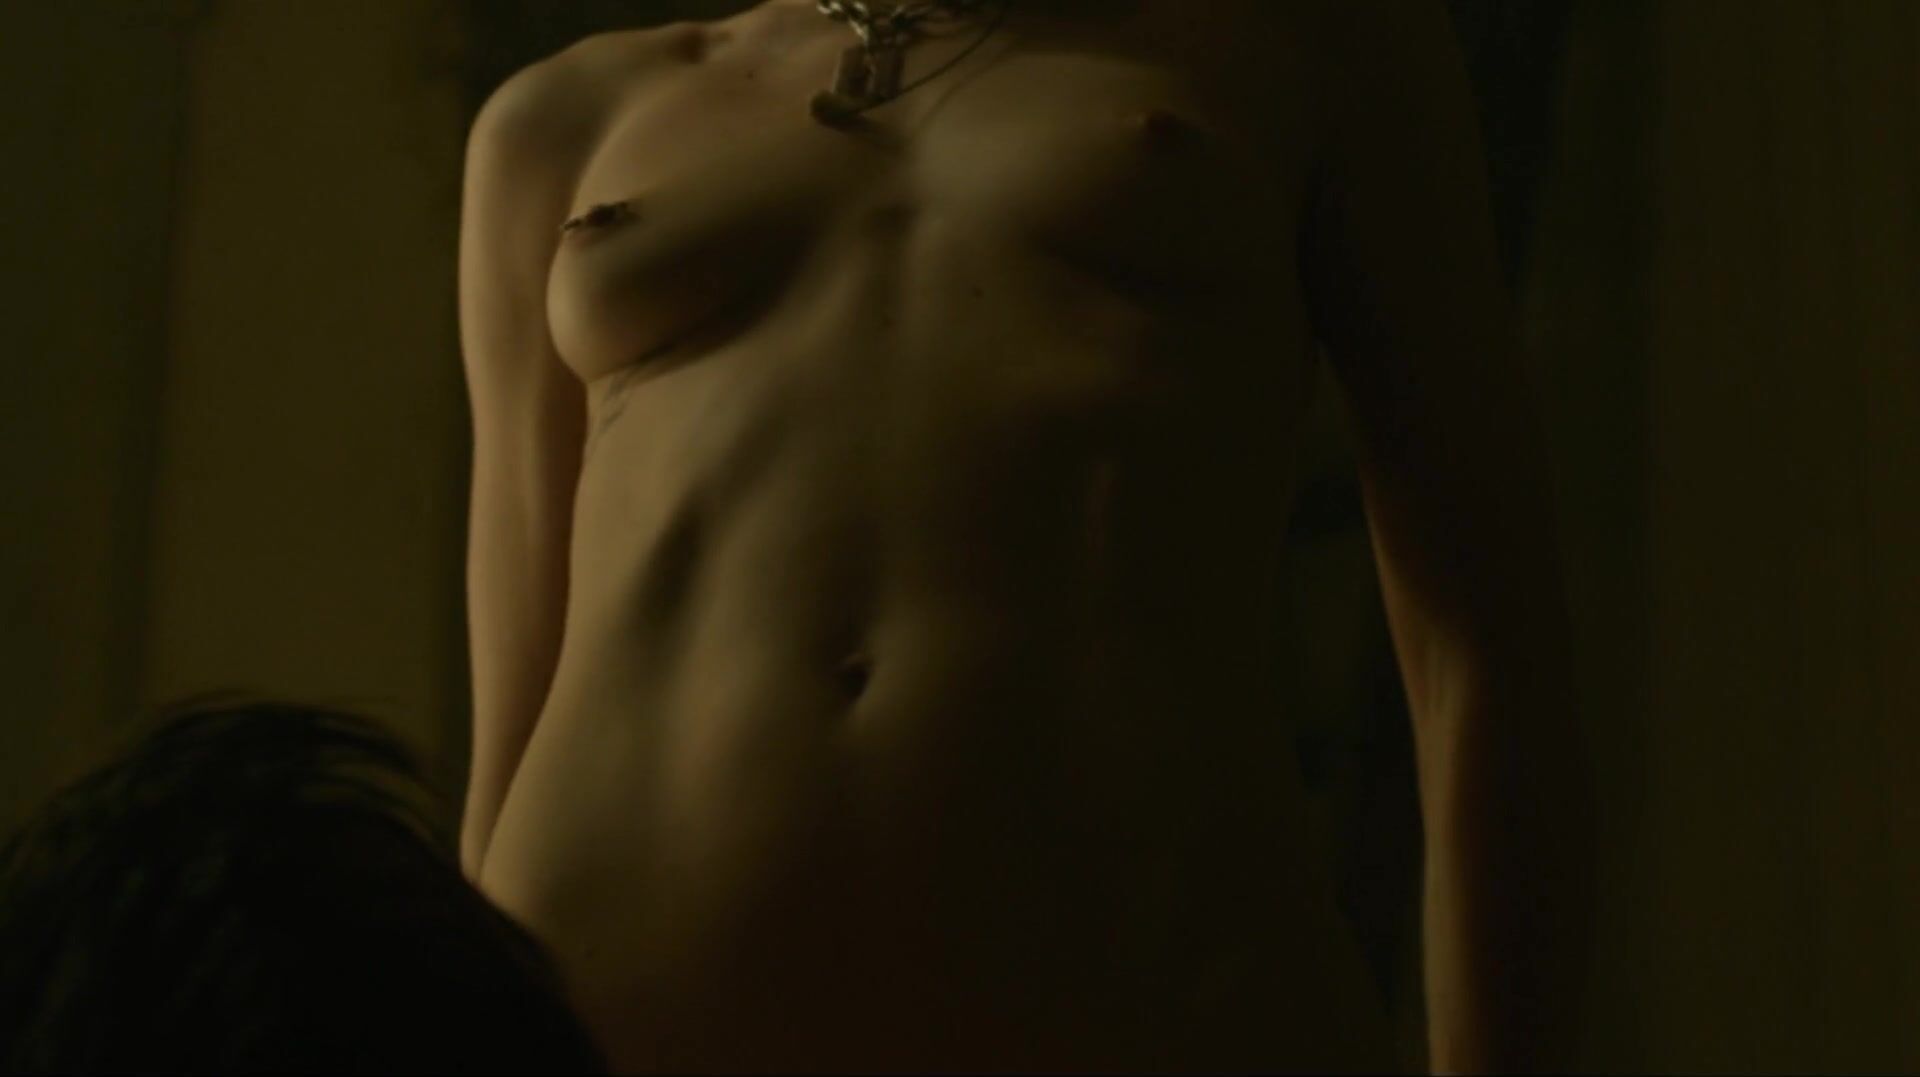 TorrentZ Men hump Rooney Mara with her consent or without it in Girl With The Dragon Tattoo Boobies - 1